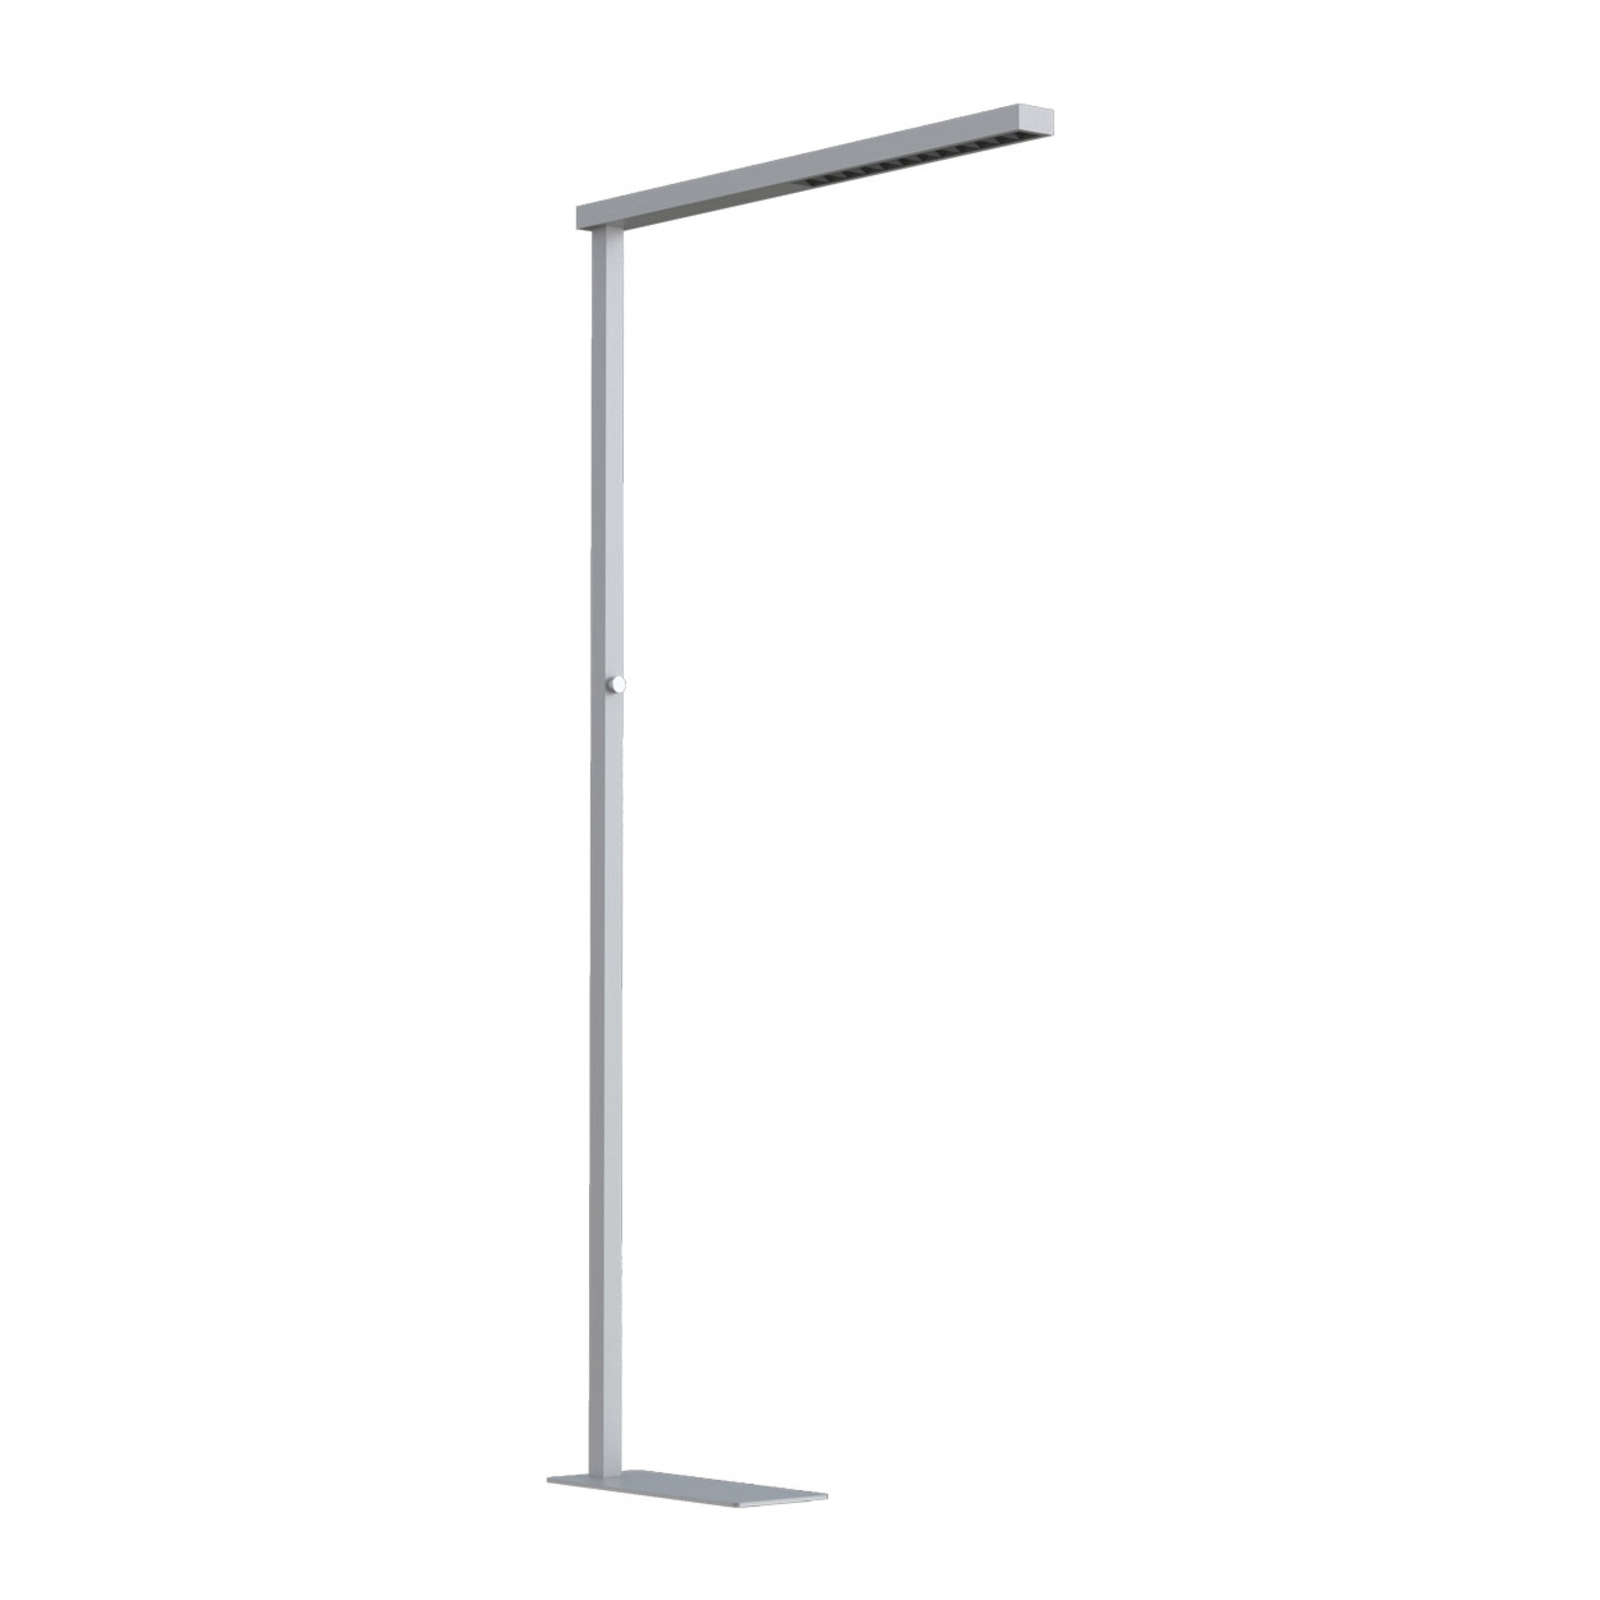 EVN Officium LED floor lamp up/down dimmable